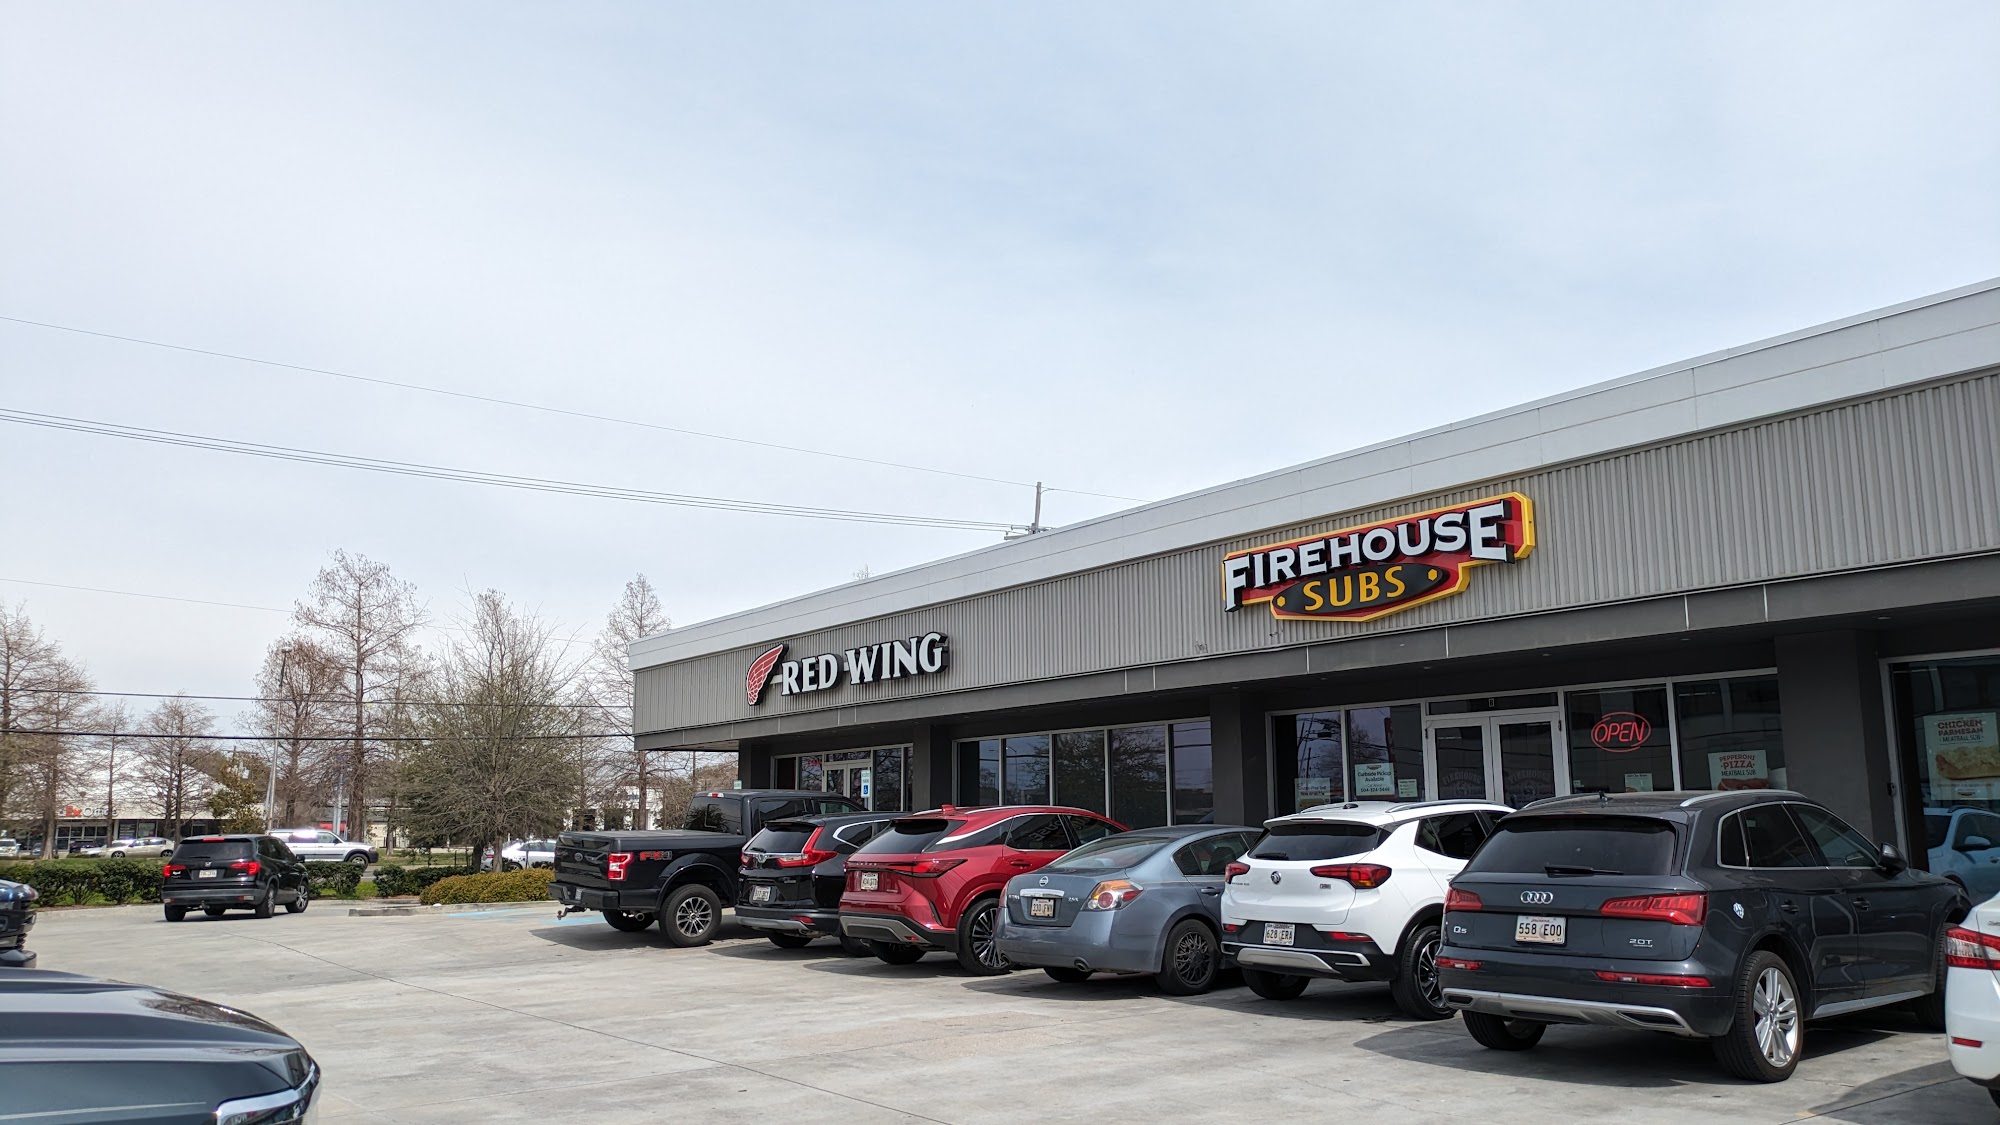 Firehouse Subs - Metairie, LA